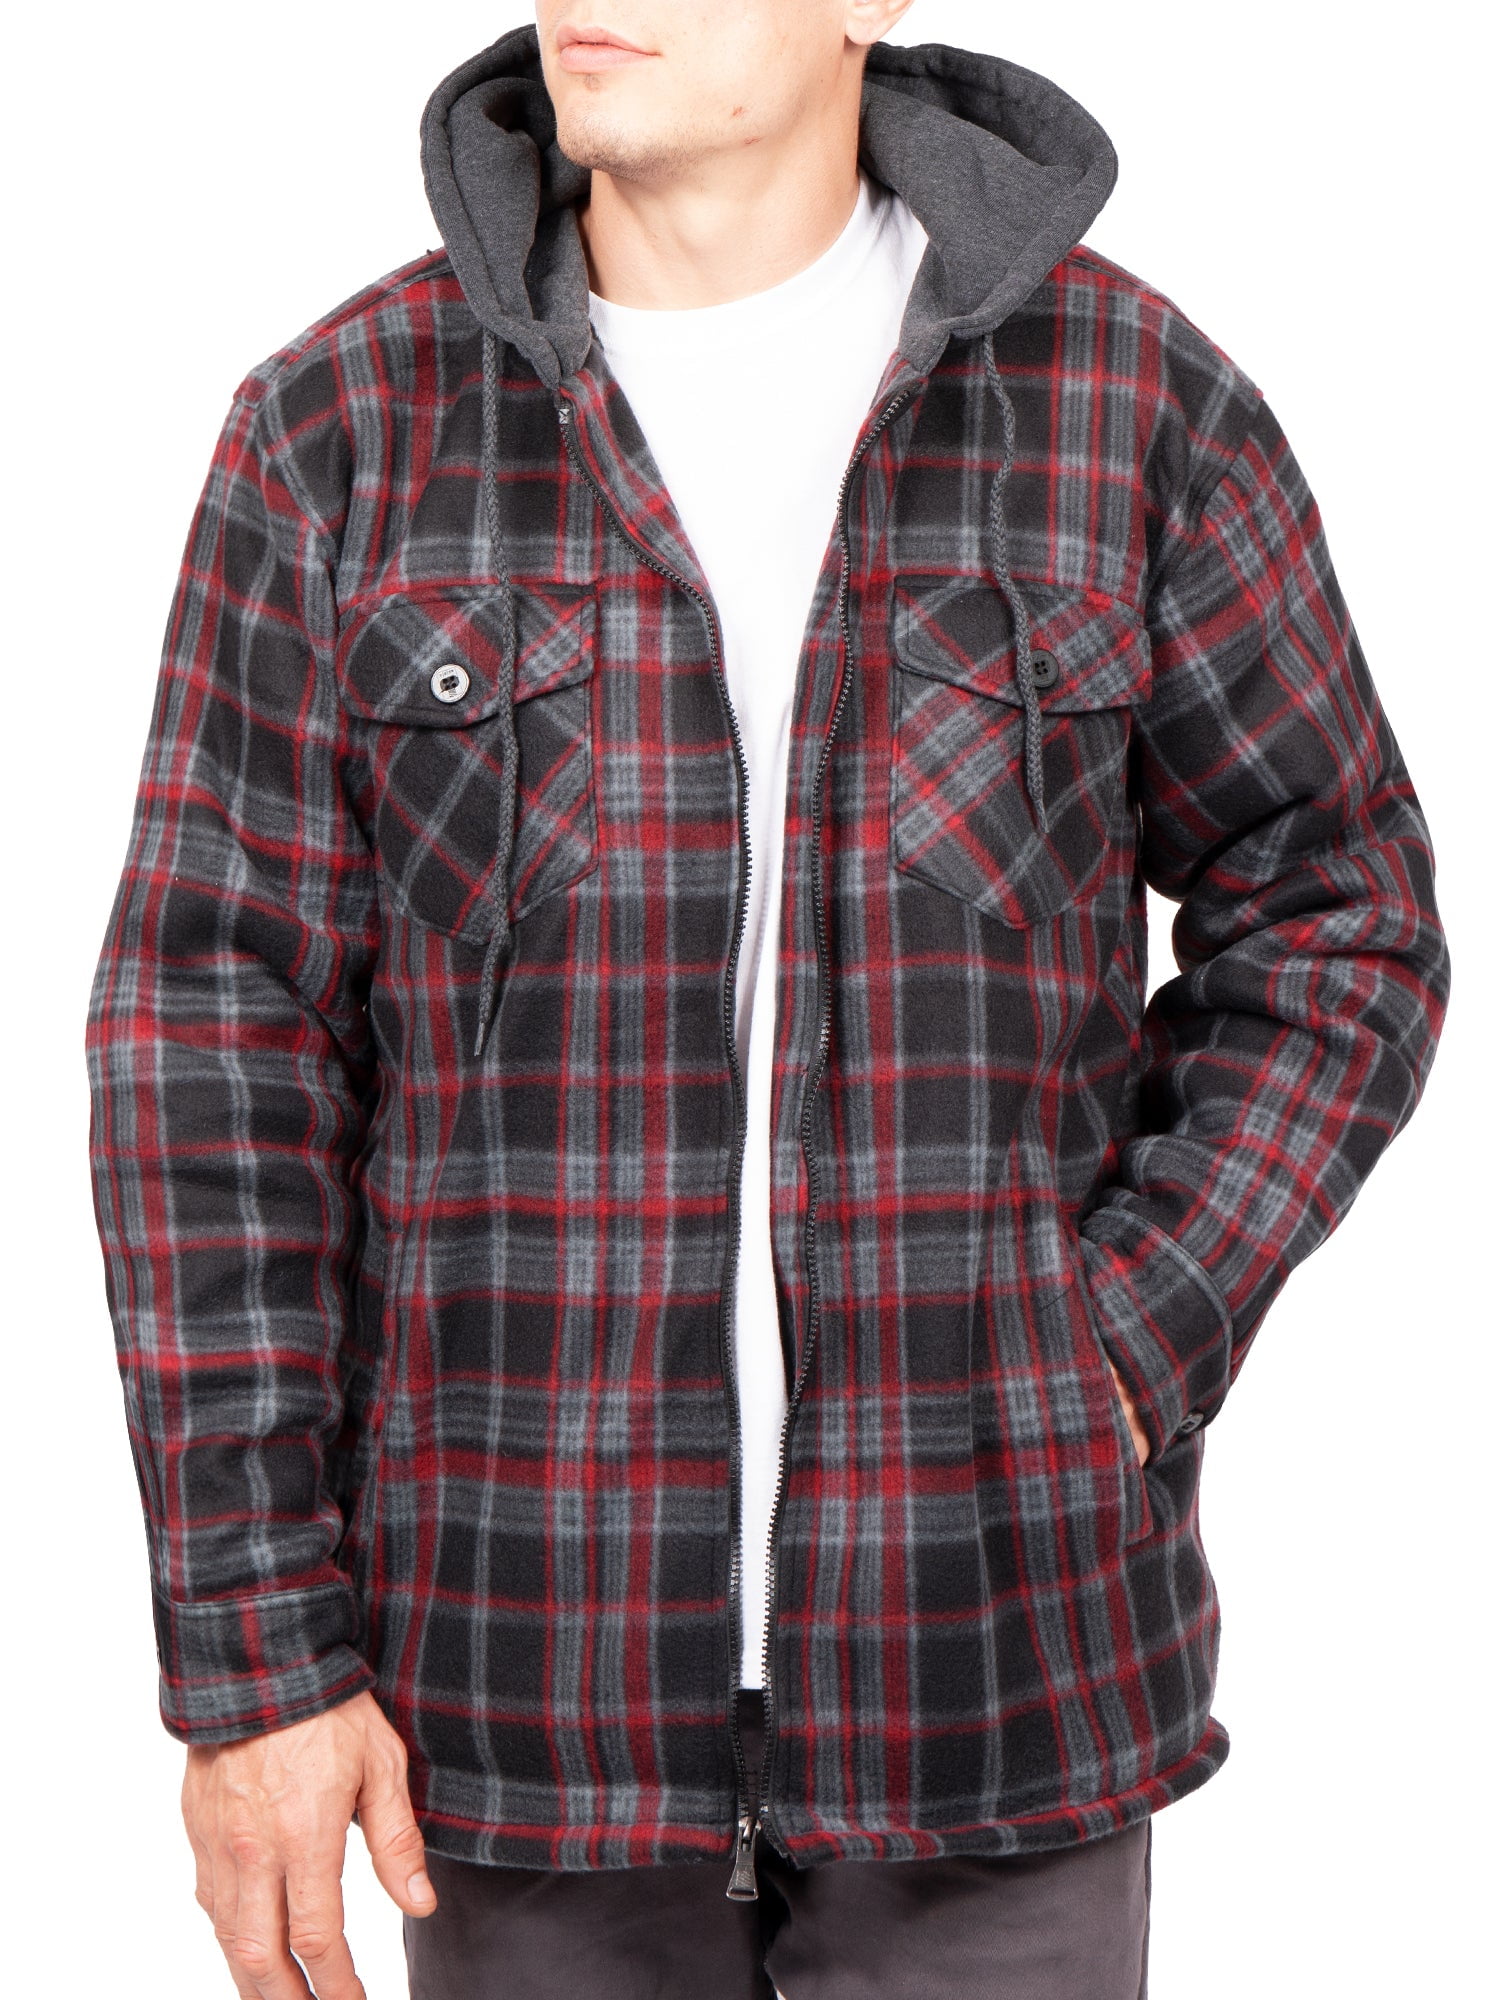 Visive Flannel Jackets For Men Big And Tall Zip Up Hoodie upto size 5XL ...